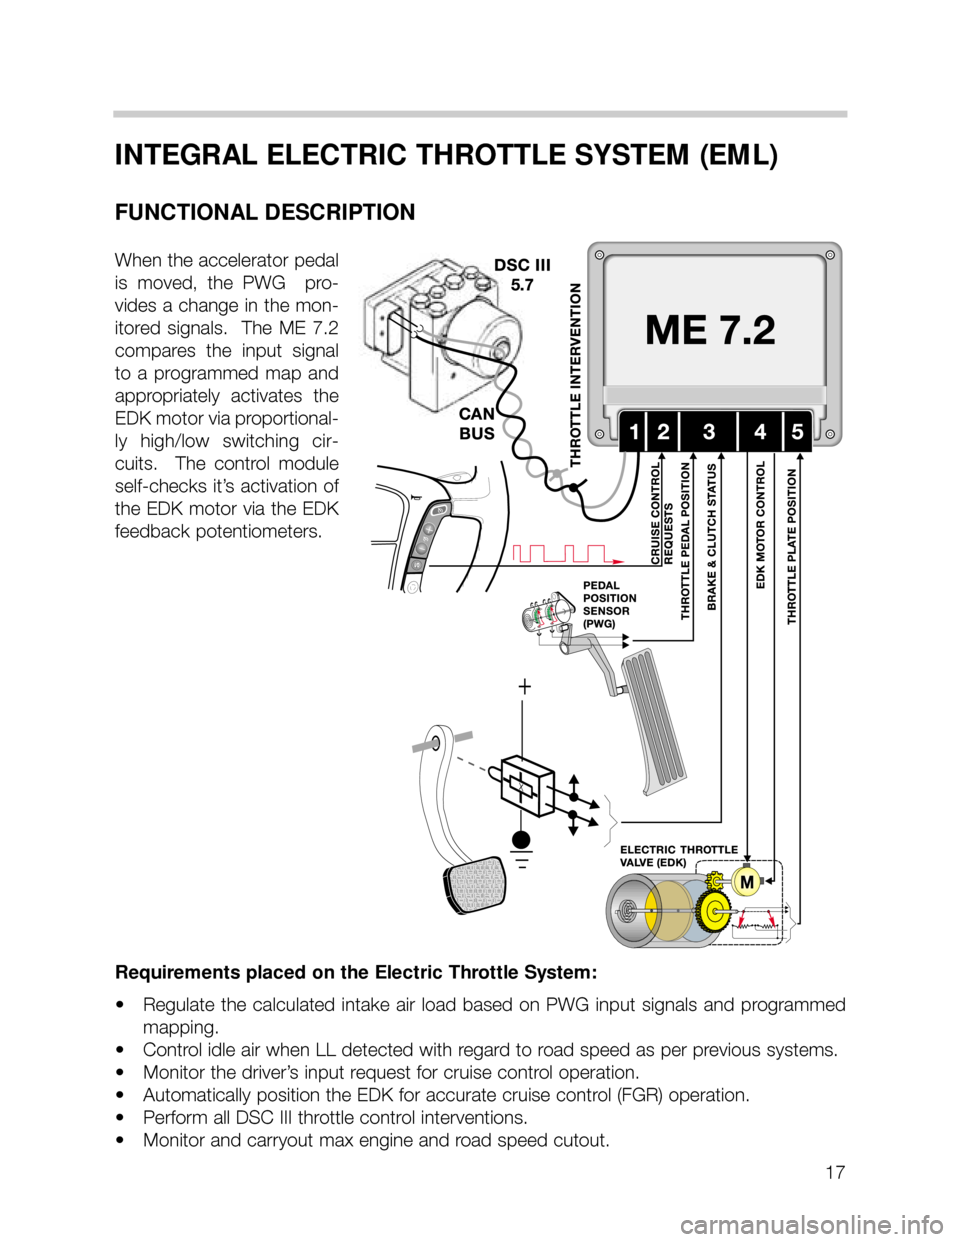 BMW 740i 2000 E38 M62TU Engine User Guide 17
INTEGRAL ELECTRIC THROTTLE SYSTEM (EML)
FUNCTIONAL DESCRIPTION
When the accelerator pedal
is  moved,  the  PWG    pro-
vides a change in the mon-
itored  signals.    The  ME  7.2
compares  the  inp